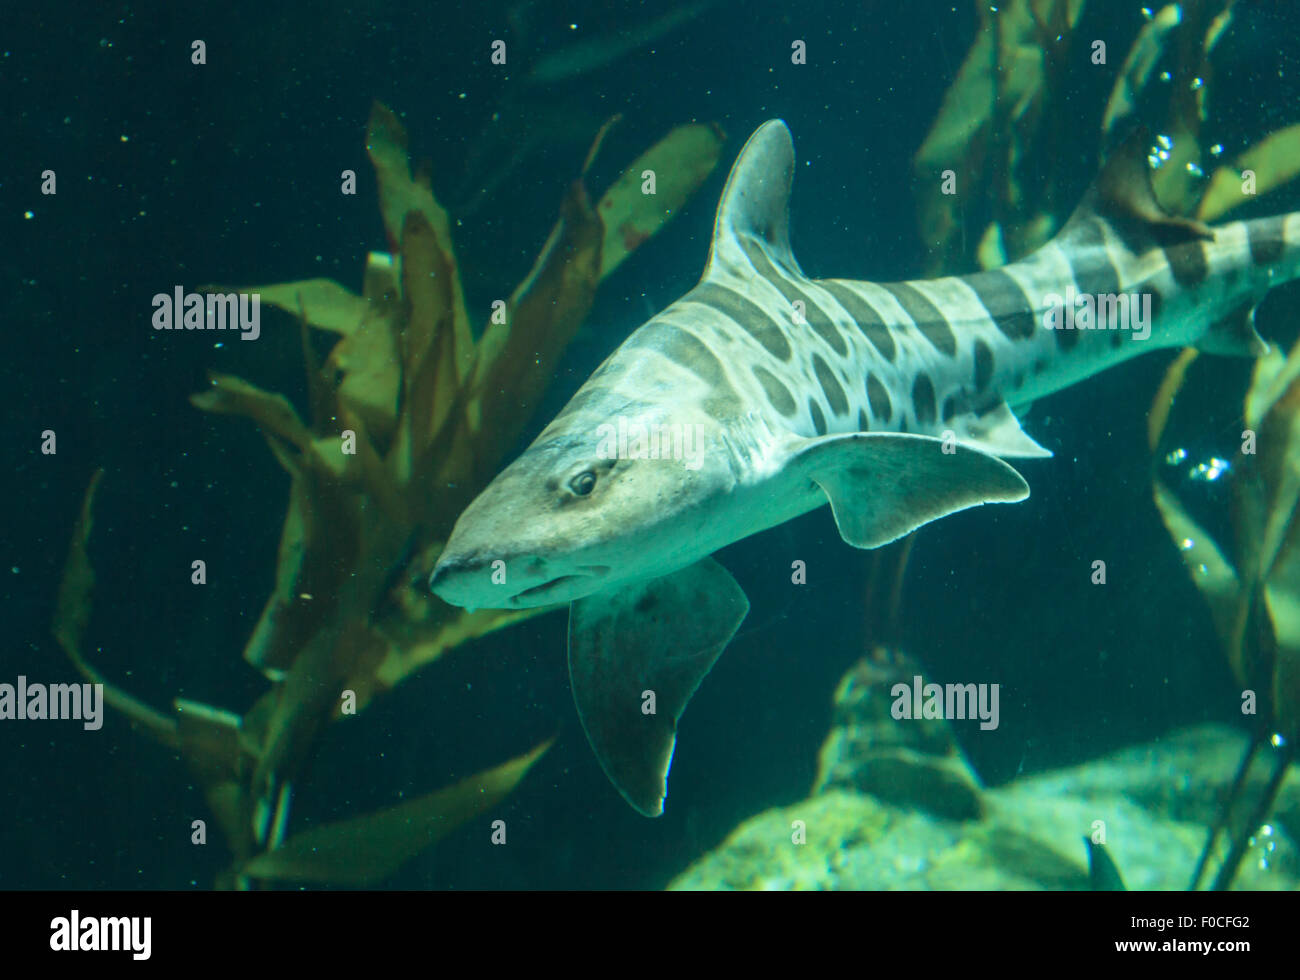 Zebra shark, Stegostoma fasciatum, also called the leopard shark, is a species of carpet shark and is found throughout the tropi Stock Photo